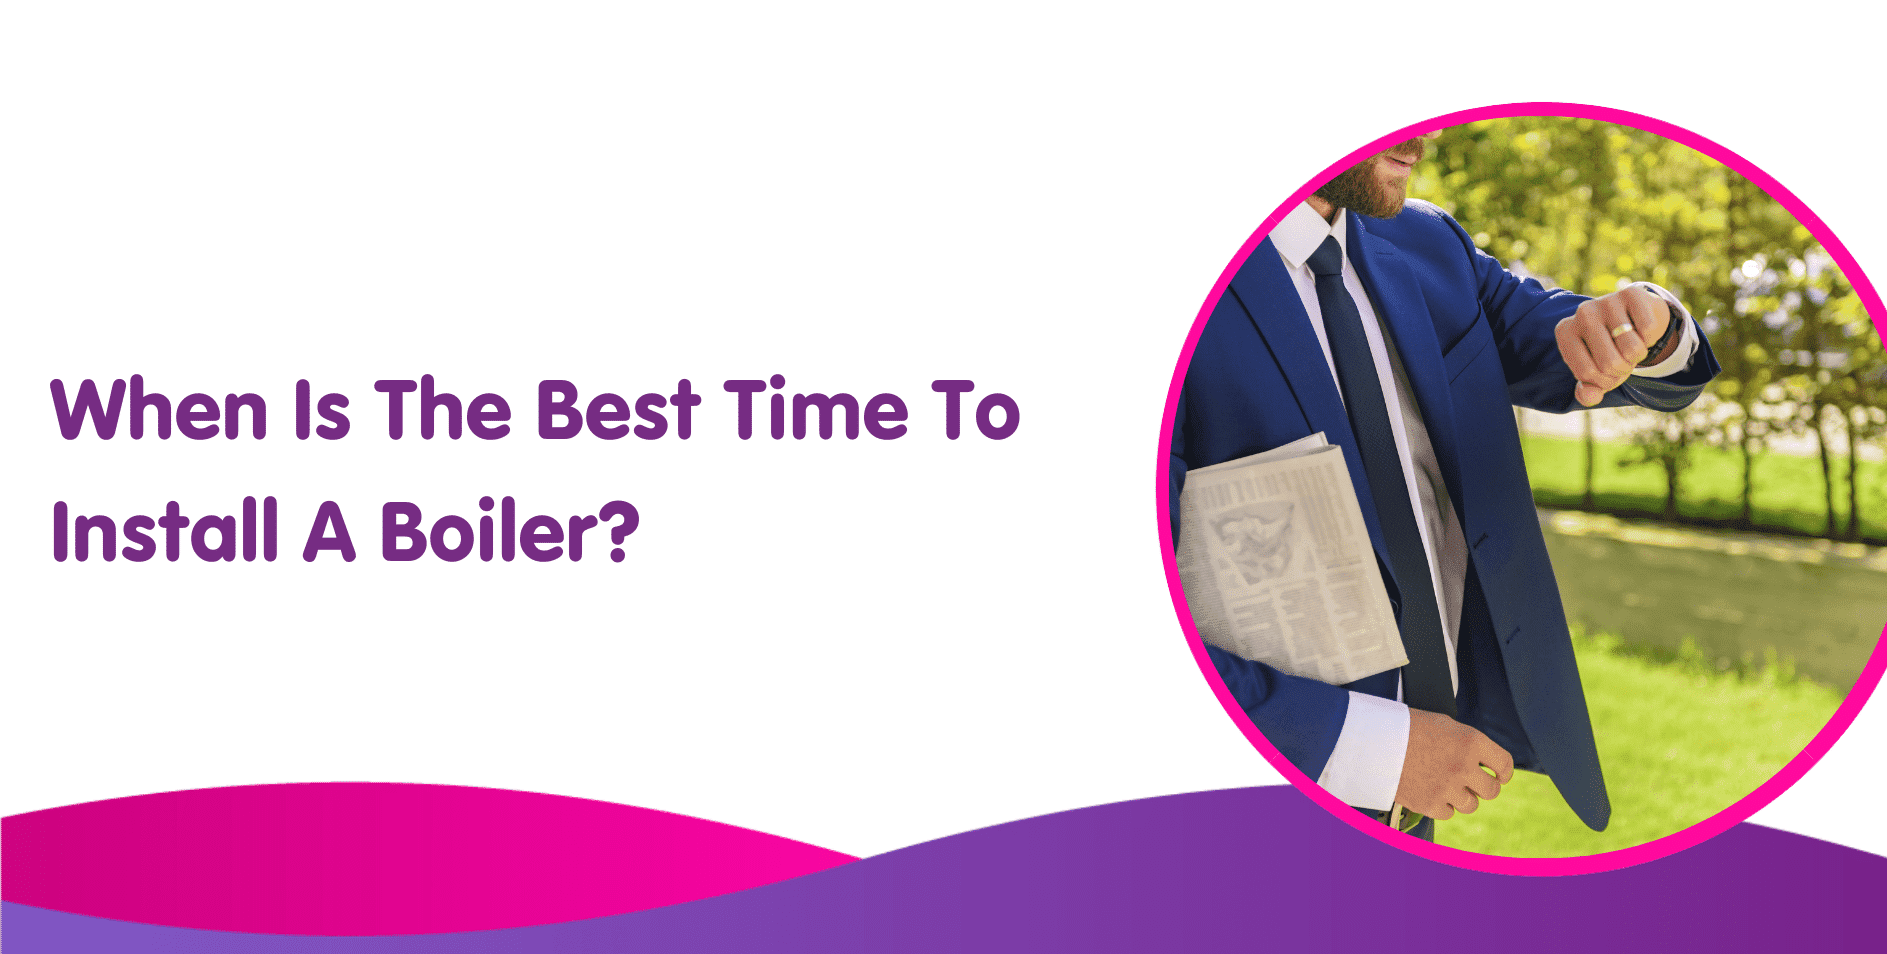 When Is The Best Time To Install A Boiler